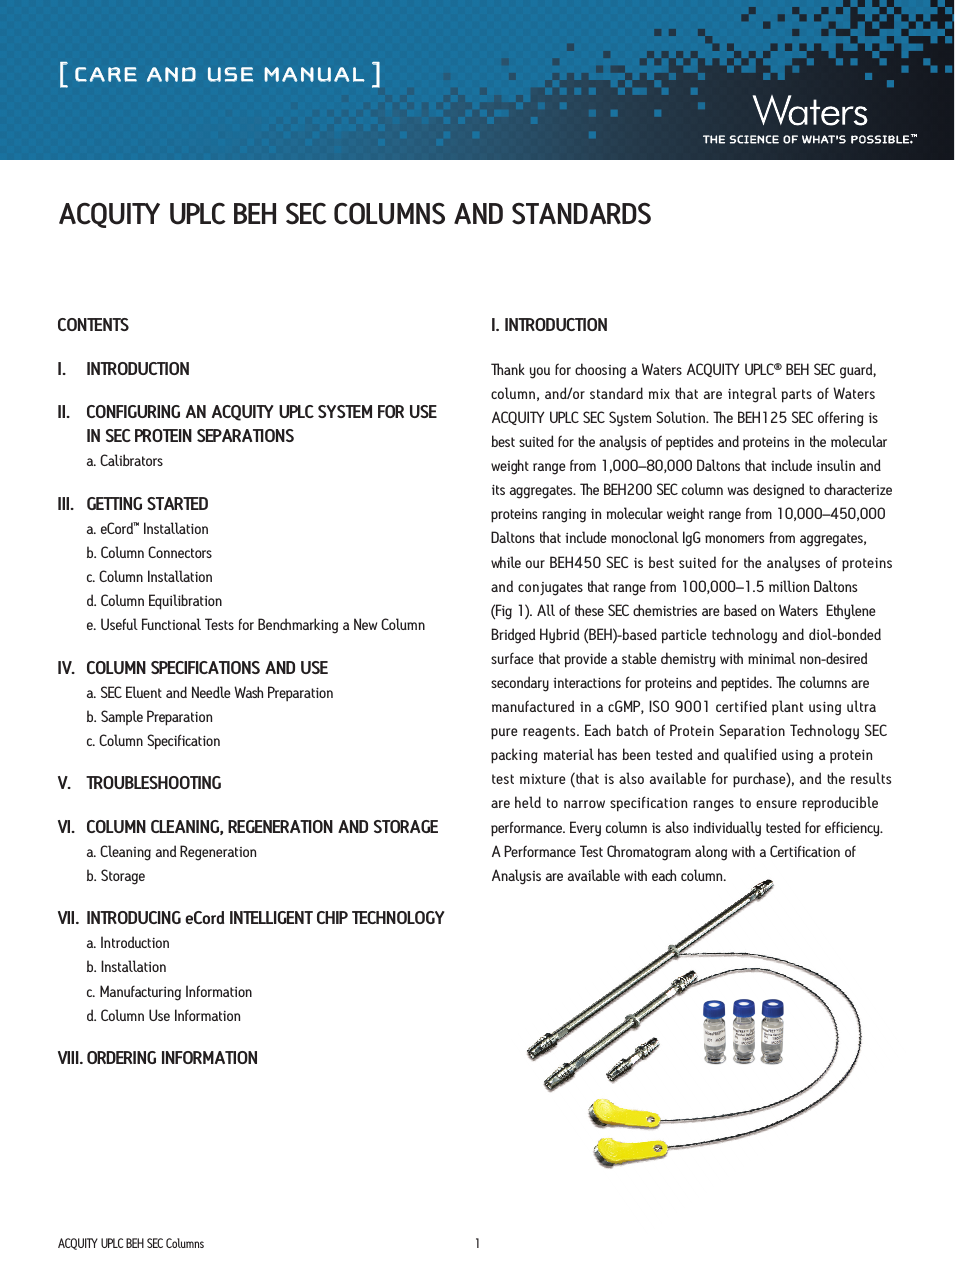 ACQUITY UPLC SEC Columns and Standards